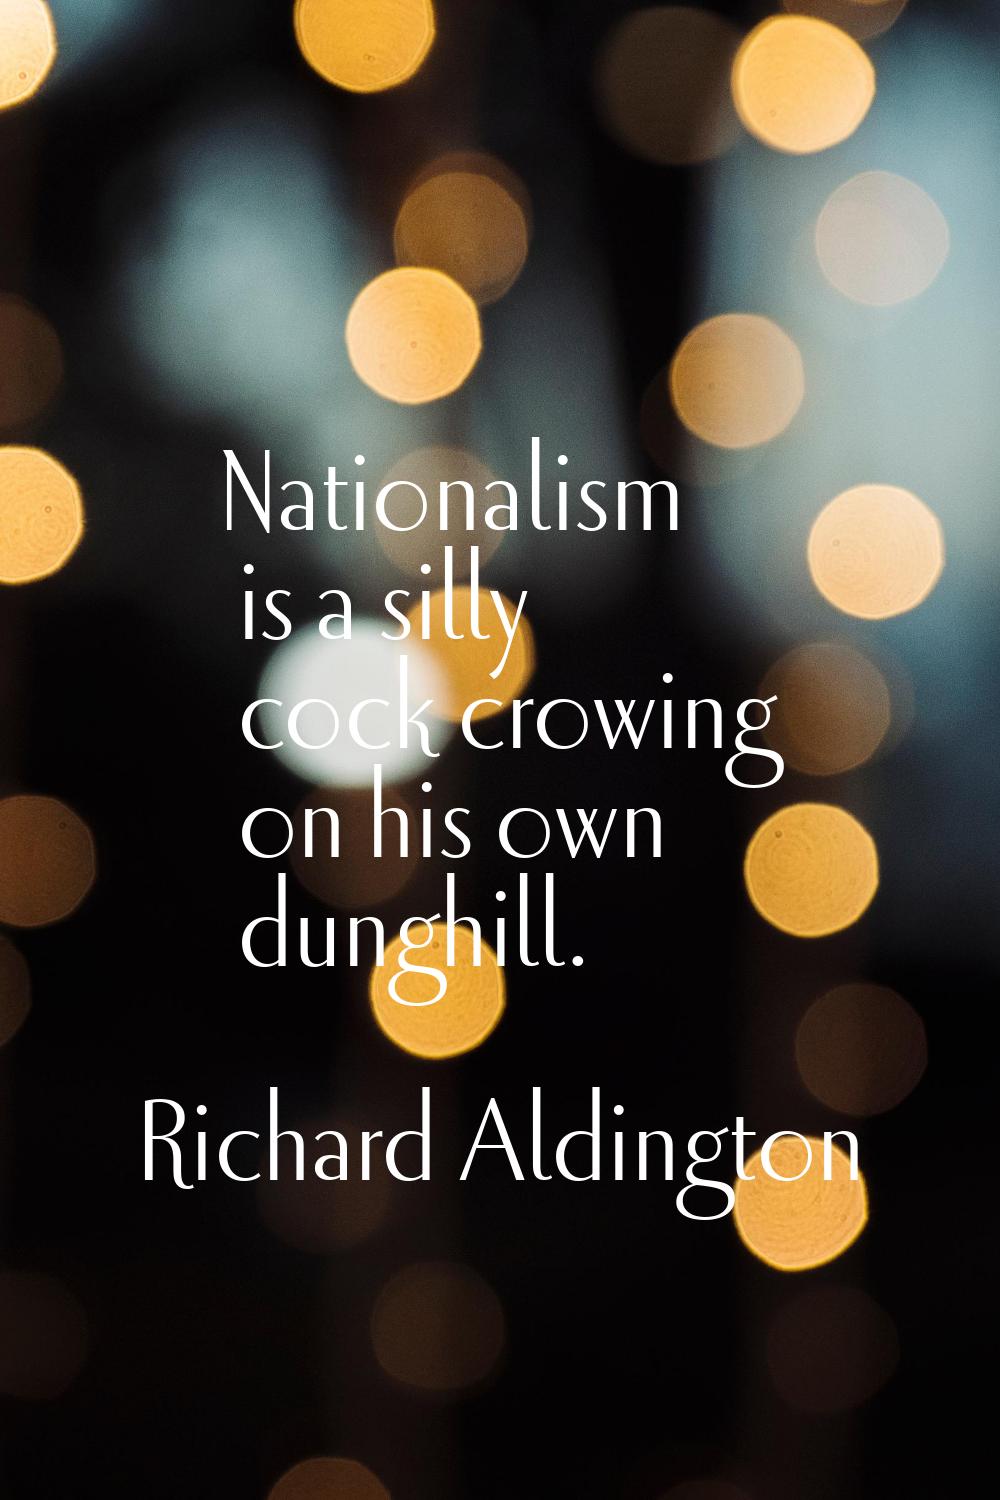 Nationalism is a silly cock crowing on his own dunghill.